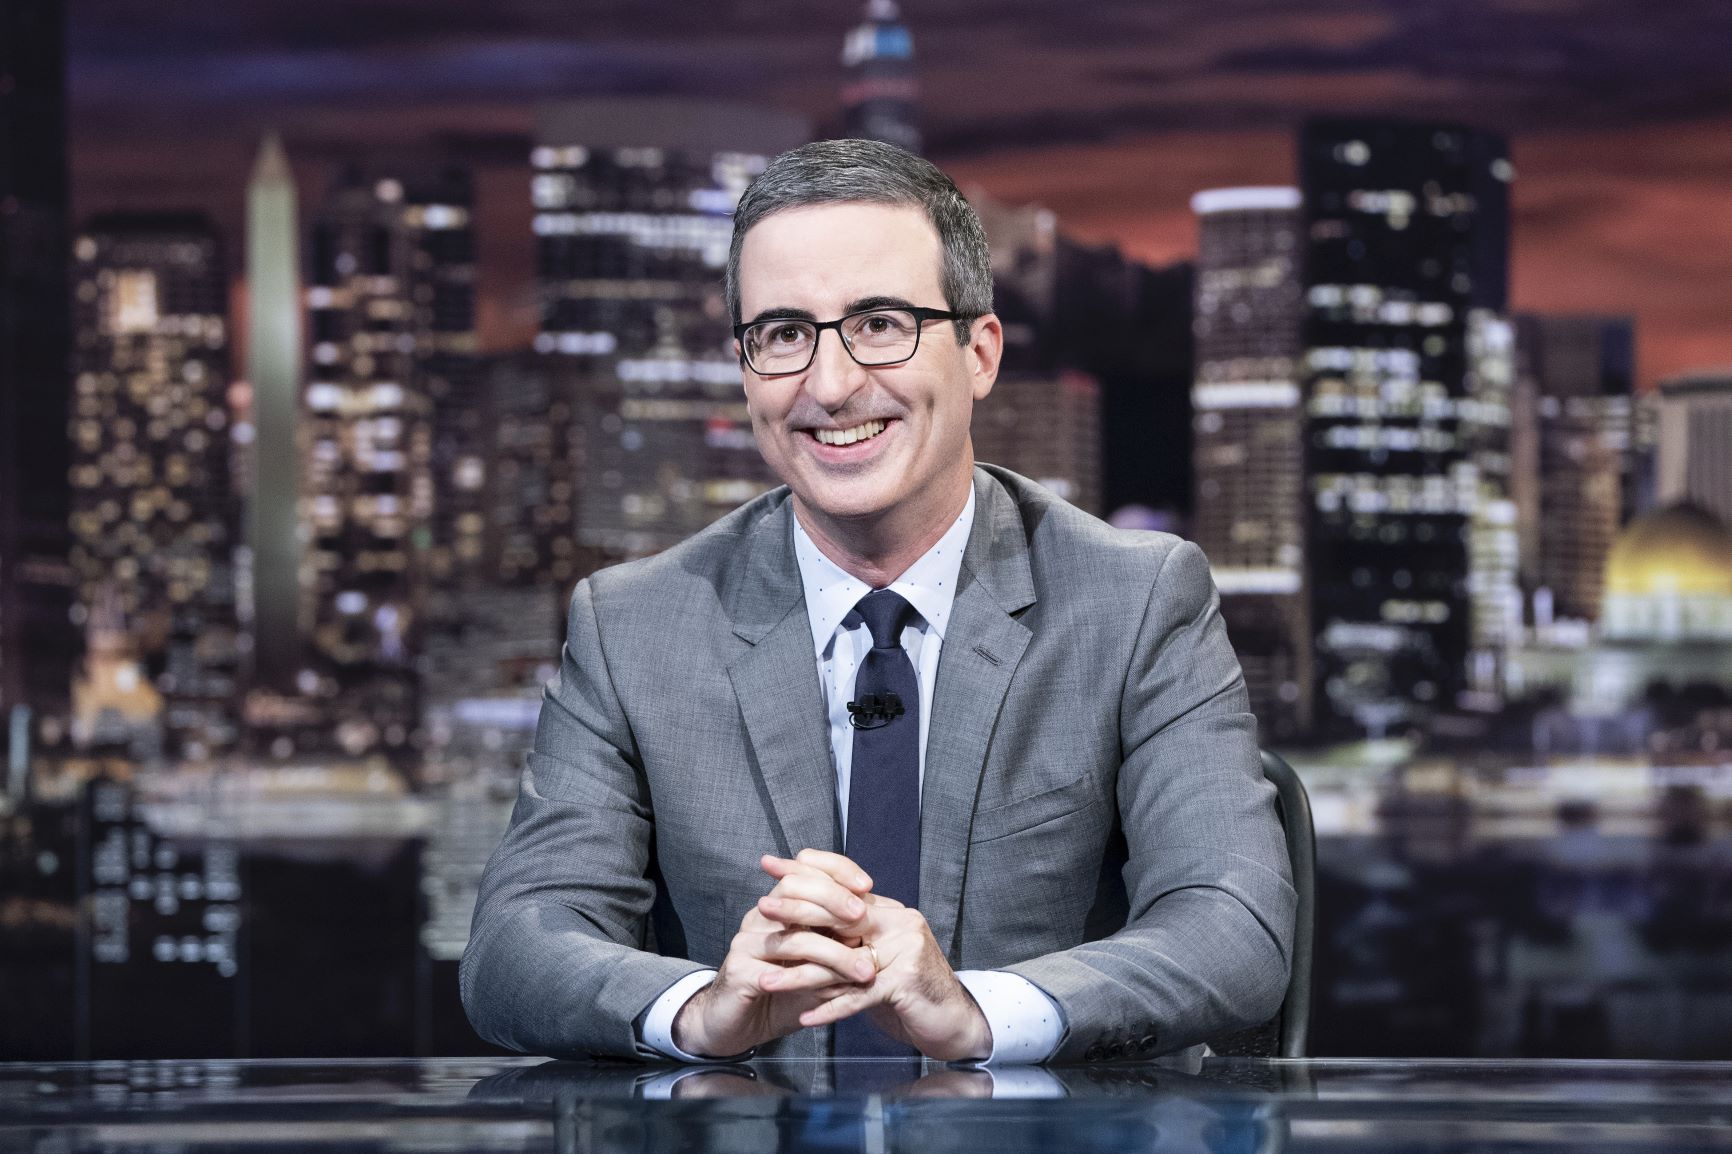 ‘Last Week Tonight’: Disney Banned John Oliver’s Show in India After He Criticized Their Prime Minister